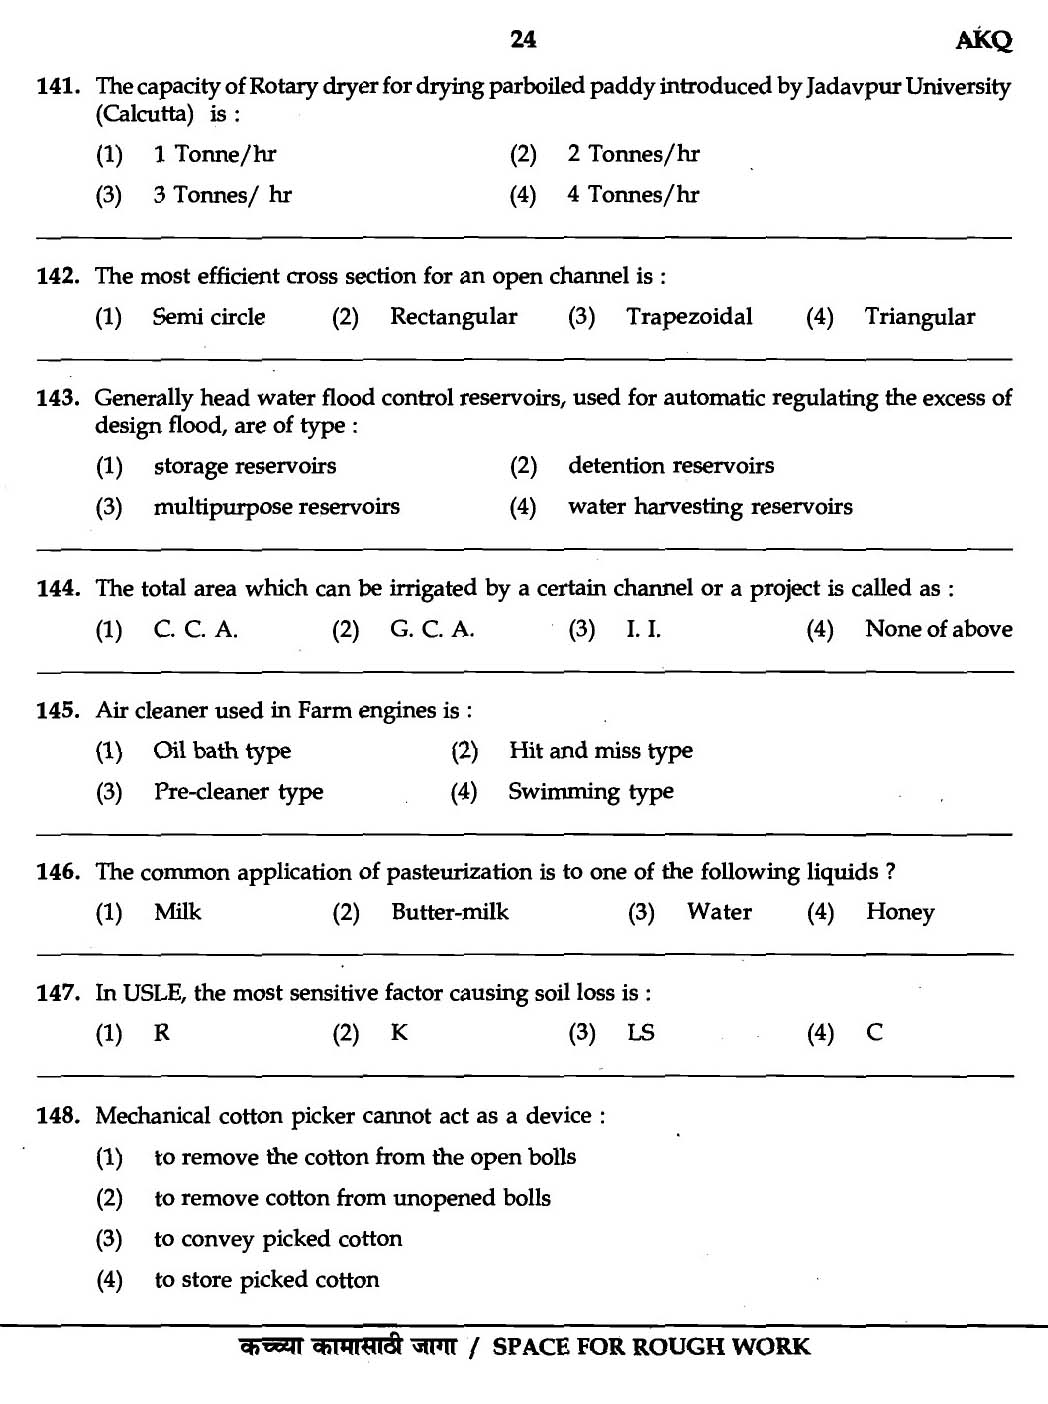 MPSC Agricultural Services Exam 2007 Question Paper Agricultural Engineering 22